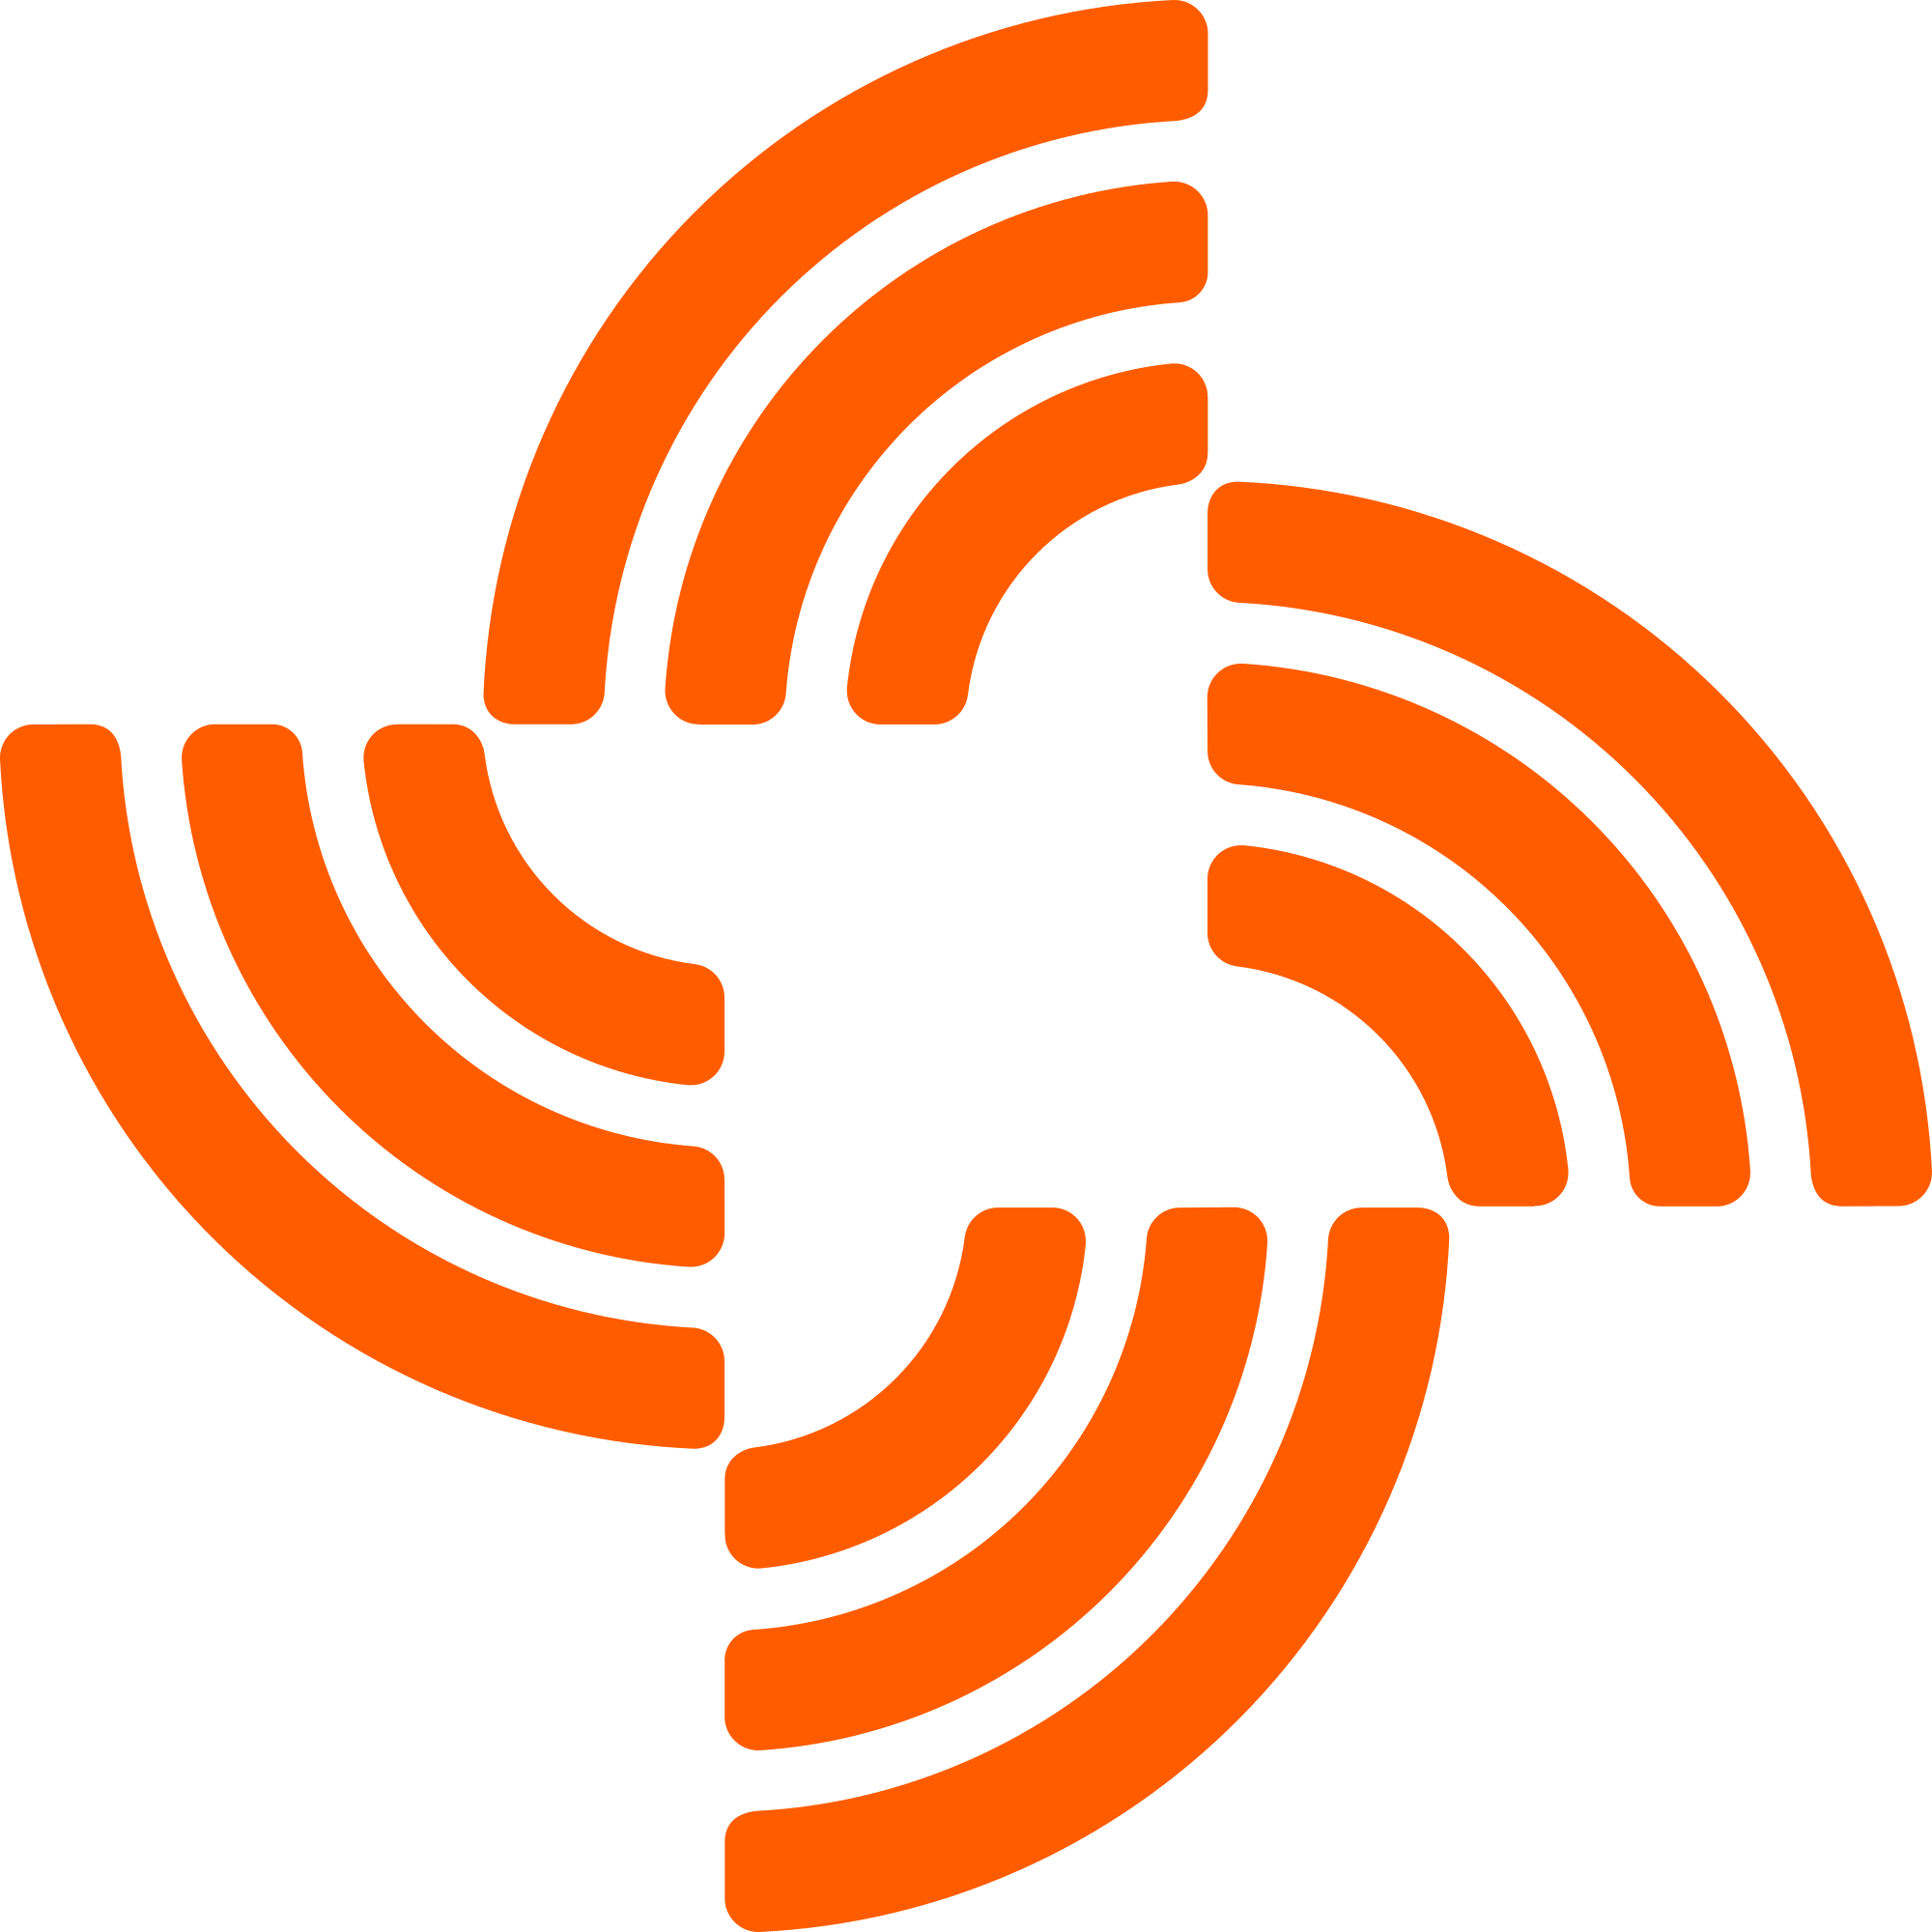 Streamr logo in png format